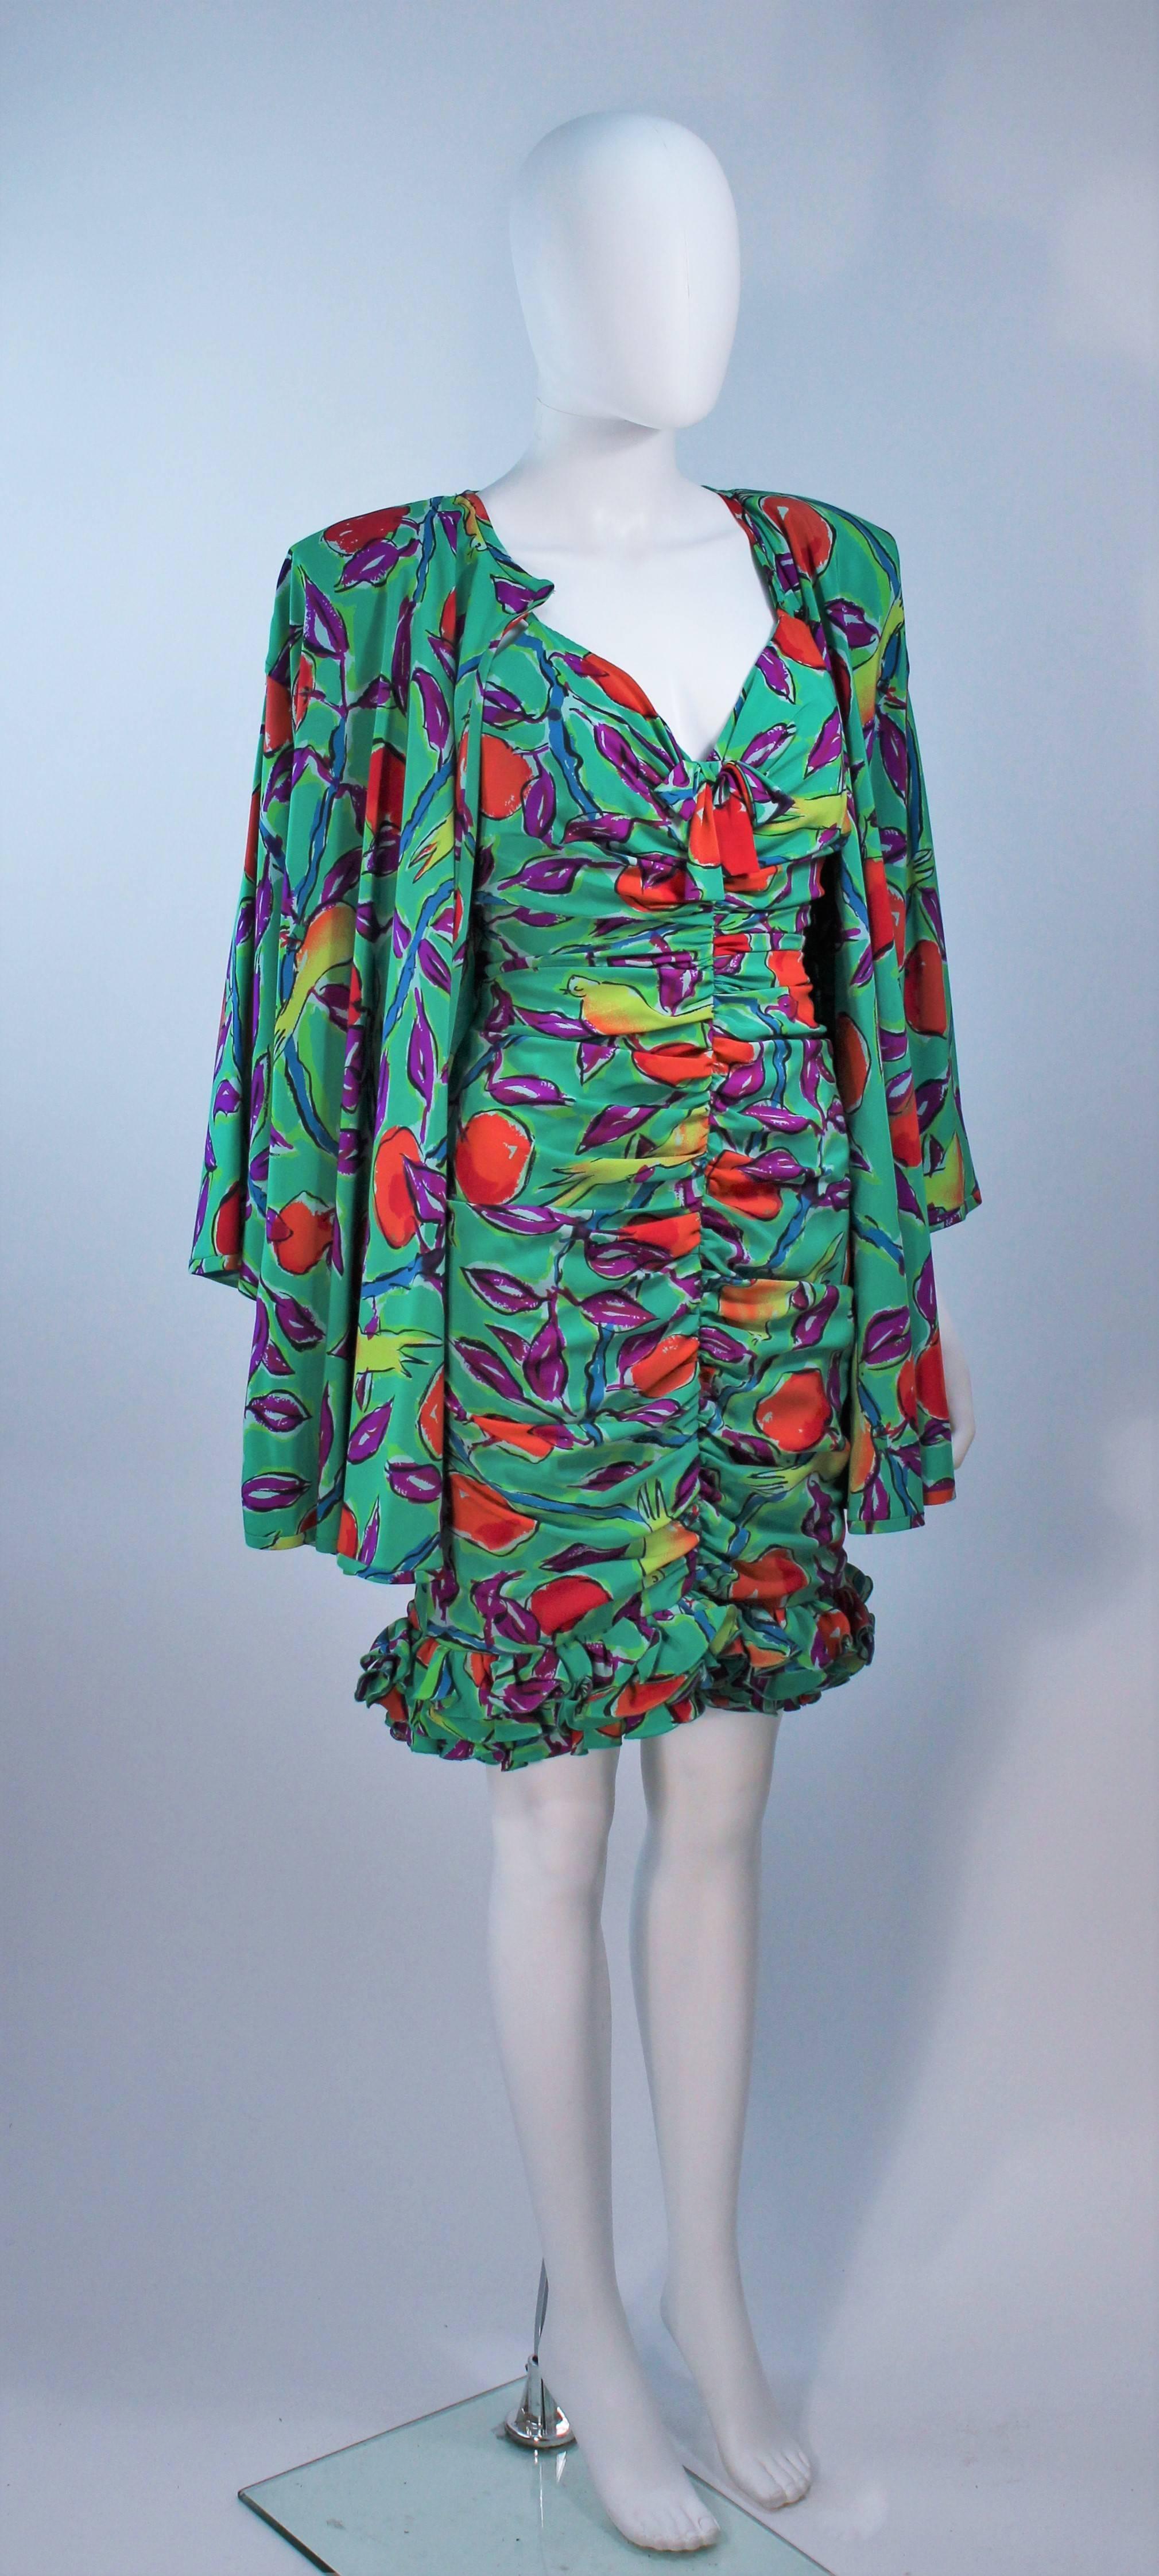 EMANUEL UNGARO Silk Cocktail Dress with Coat Size 8 For Sale 1